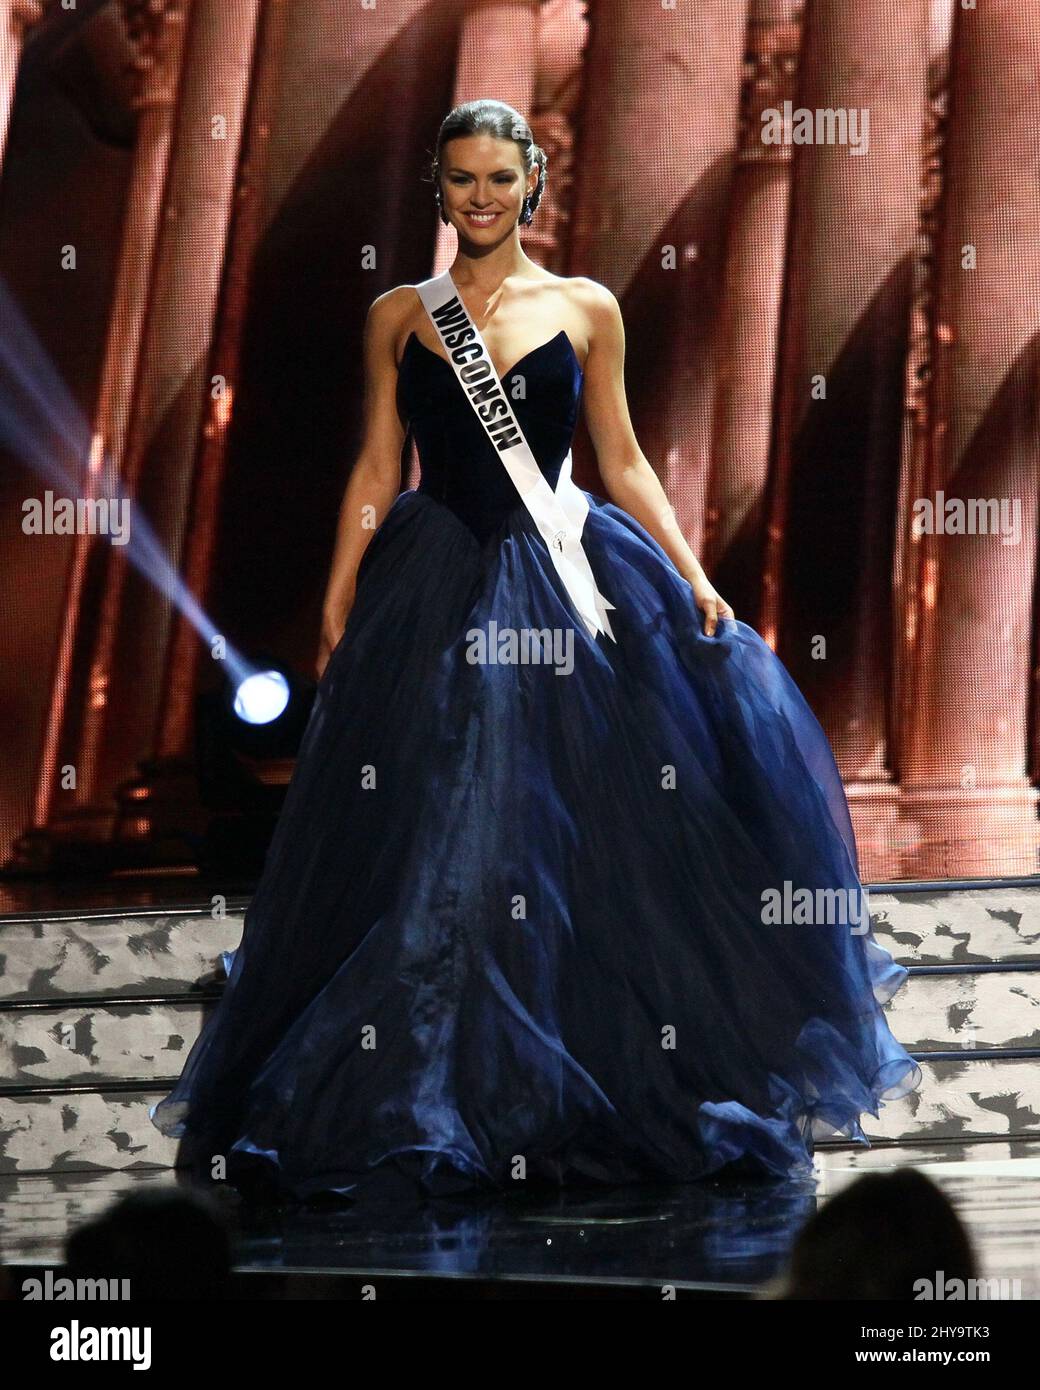 Miss Wisconsin USA, Kate Redeker on stage during the 2016 MISS USA Pageant Preliminary Competition, T-Mobile Arena, Las Vegas, NV, on June 1, 2016. Stock Photo